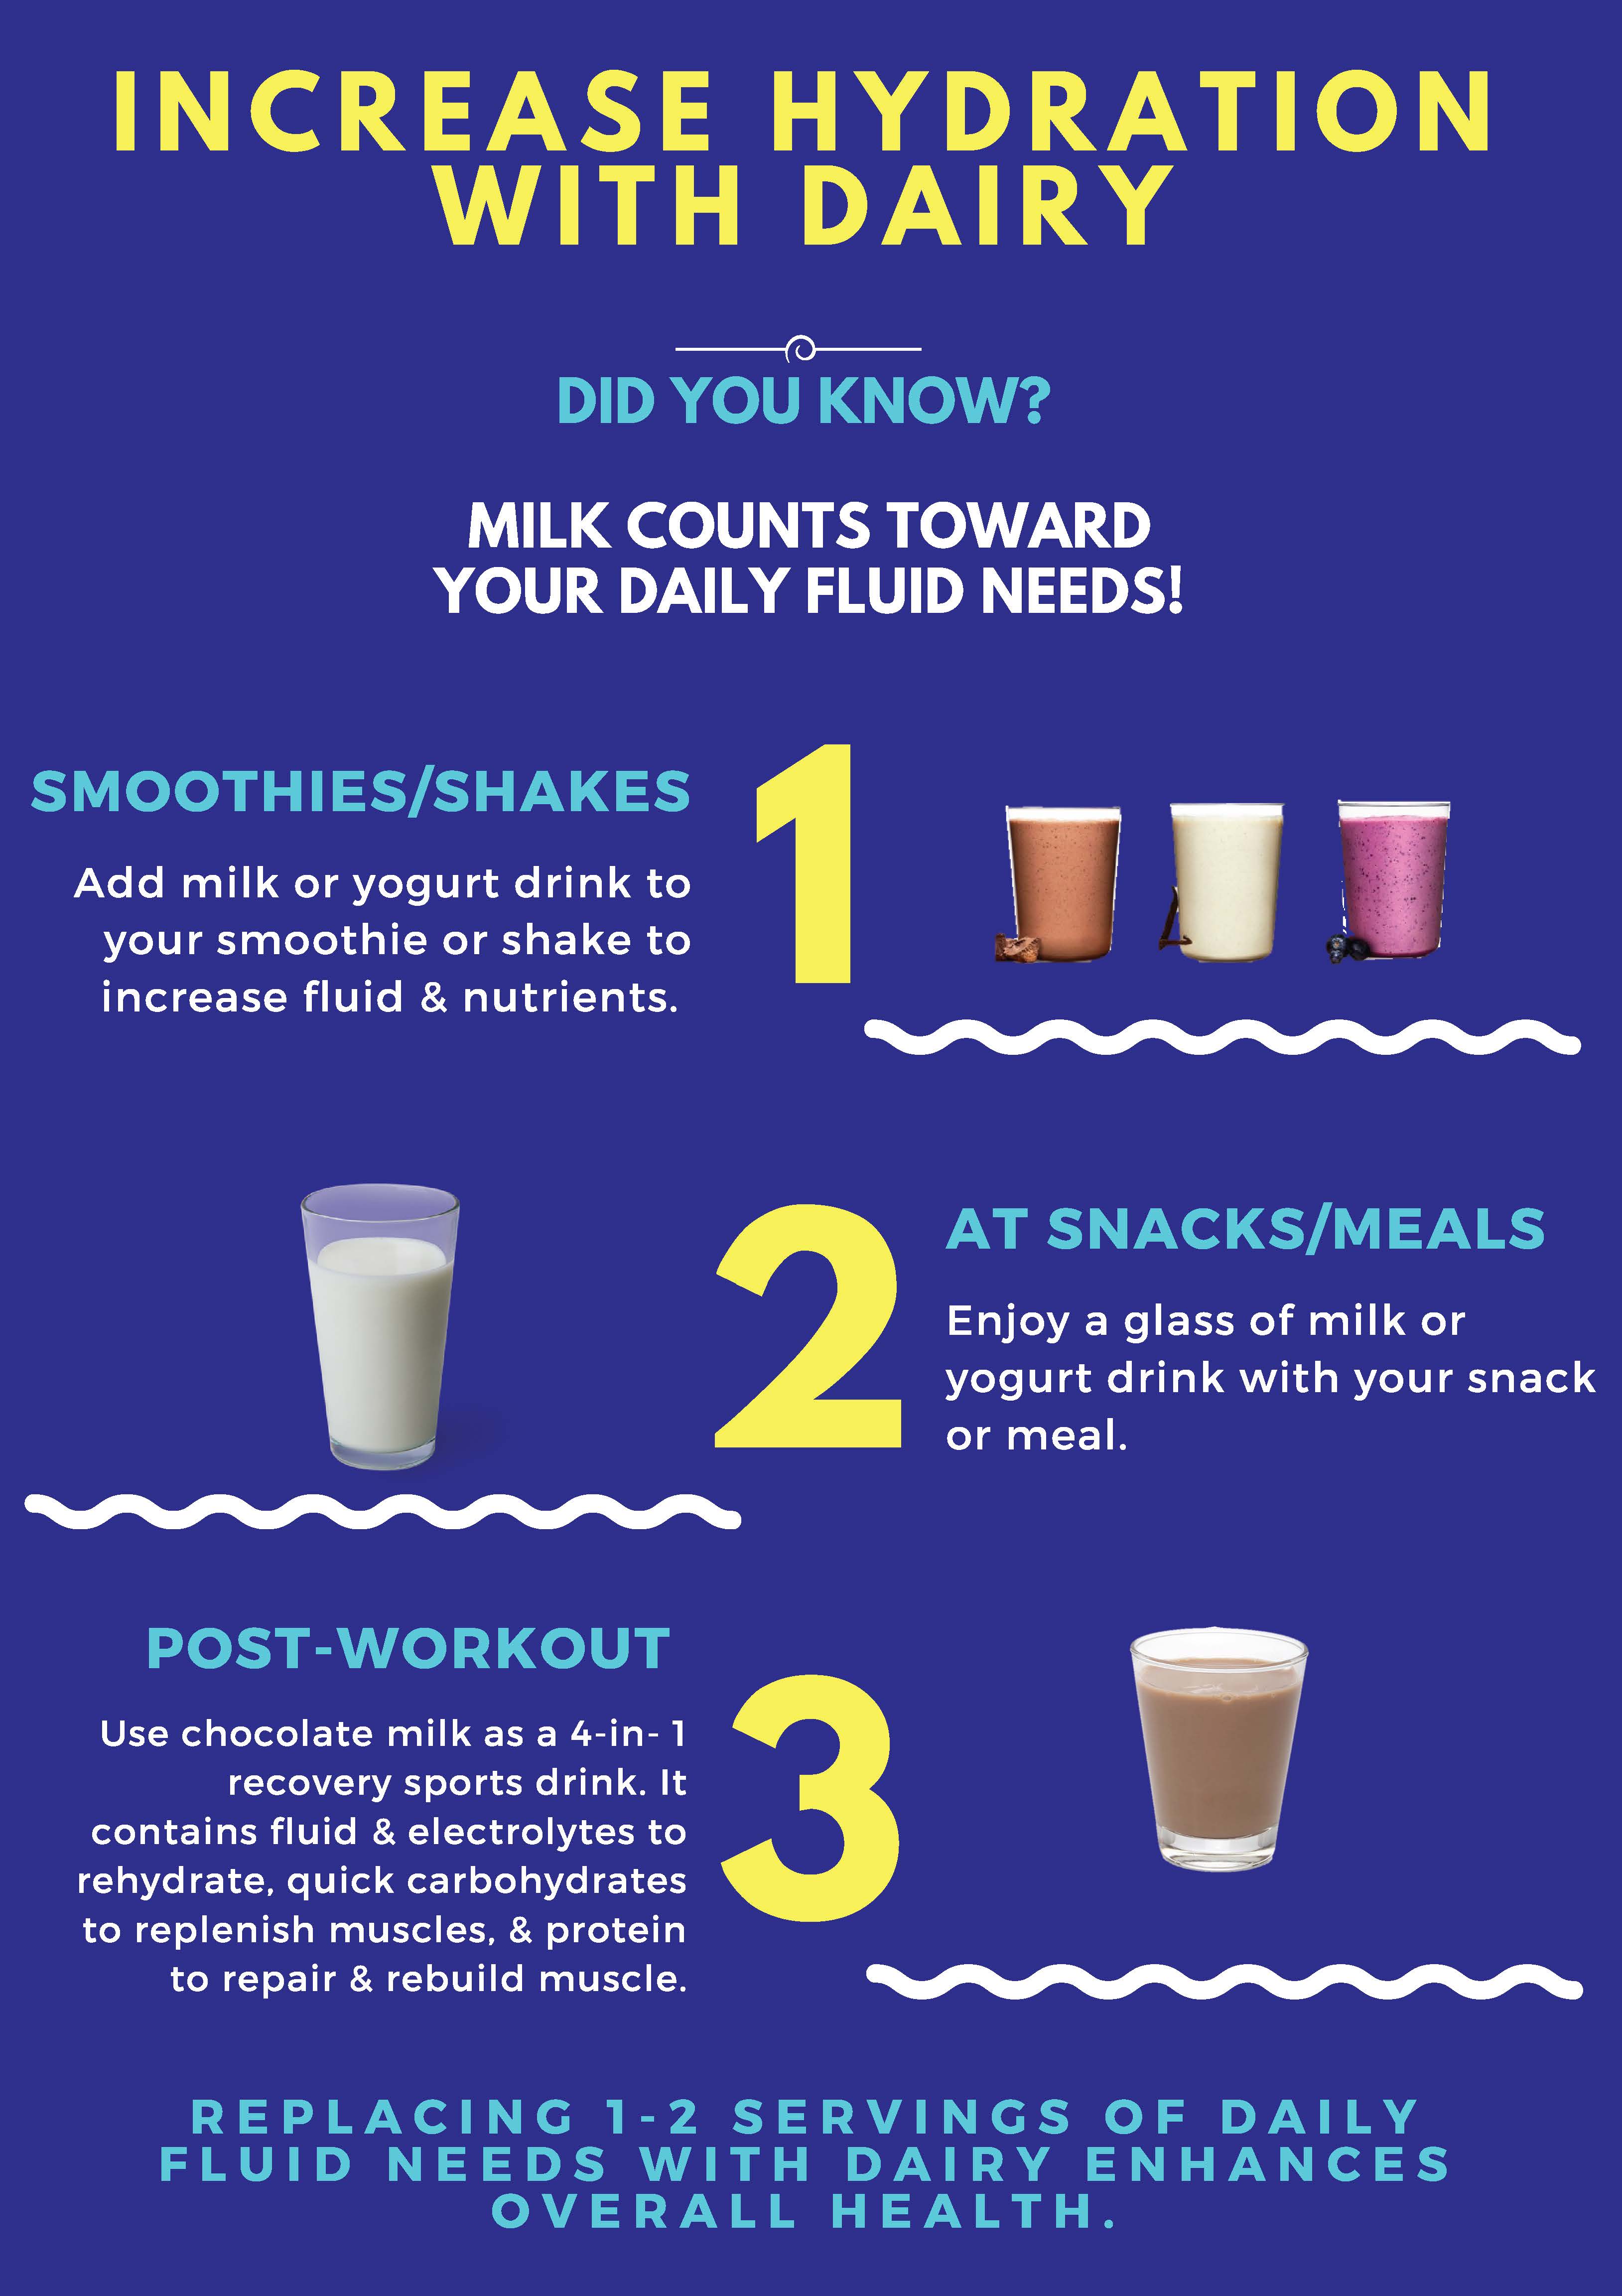 Increasing Hydration with Dairy